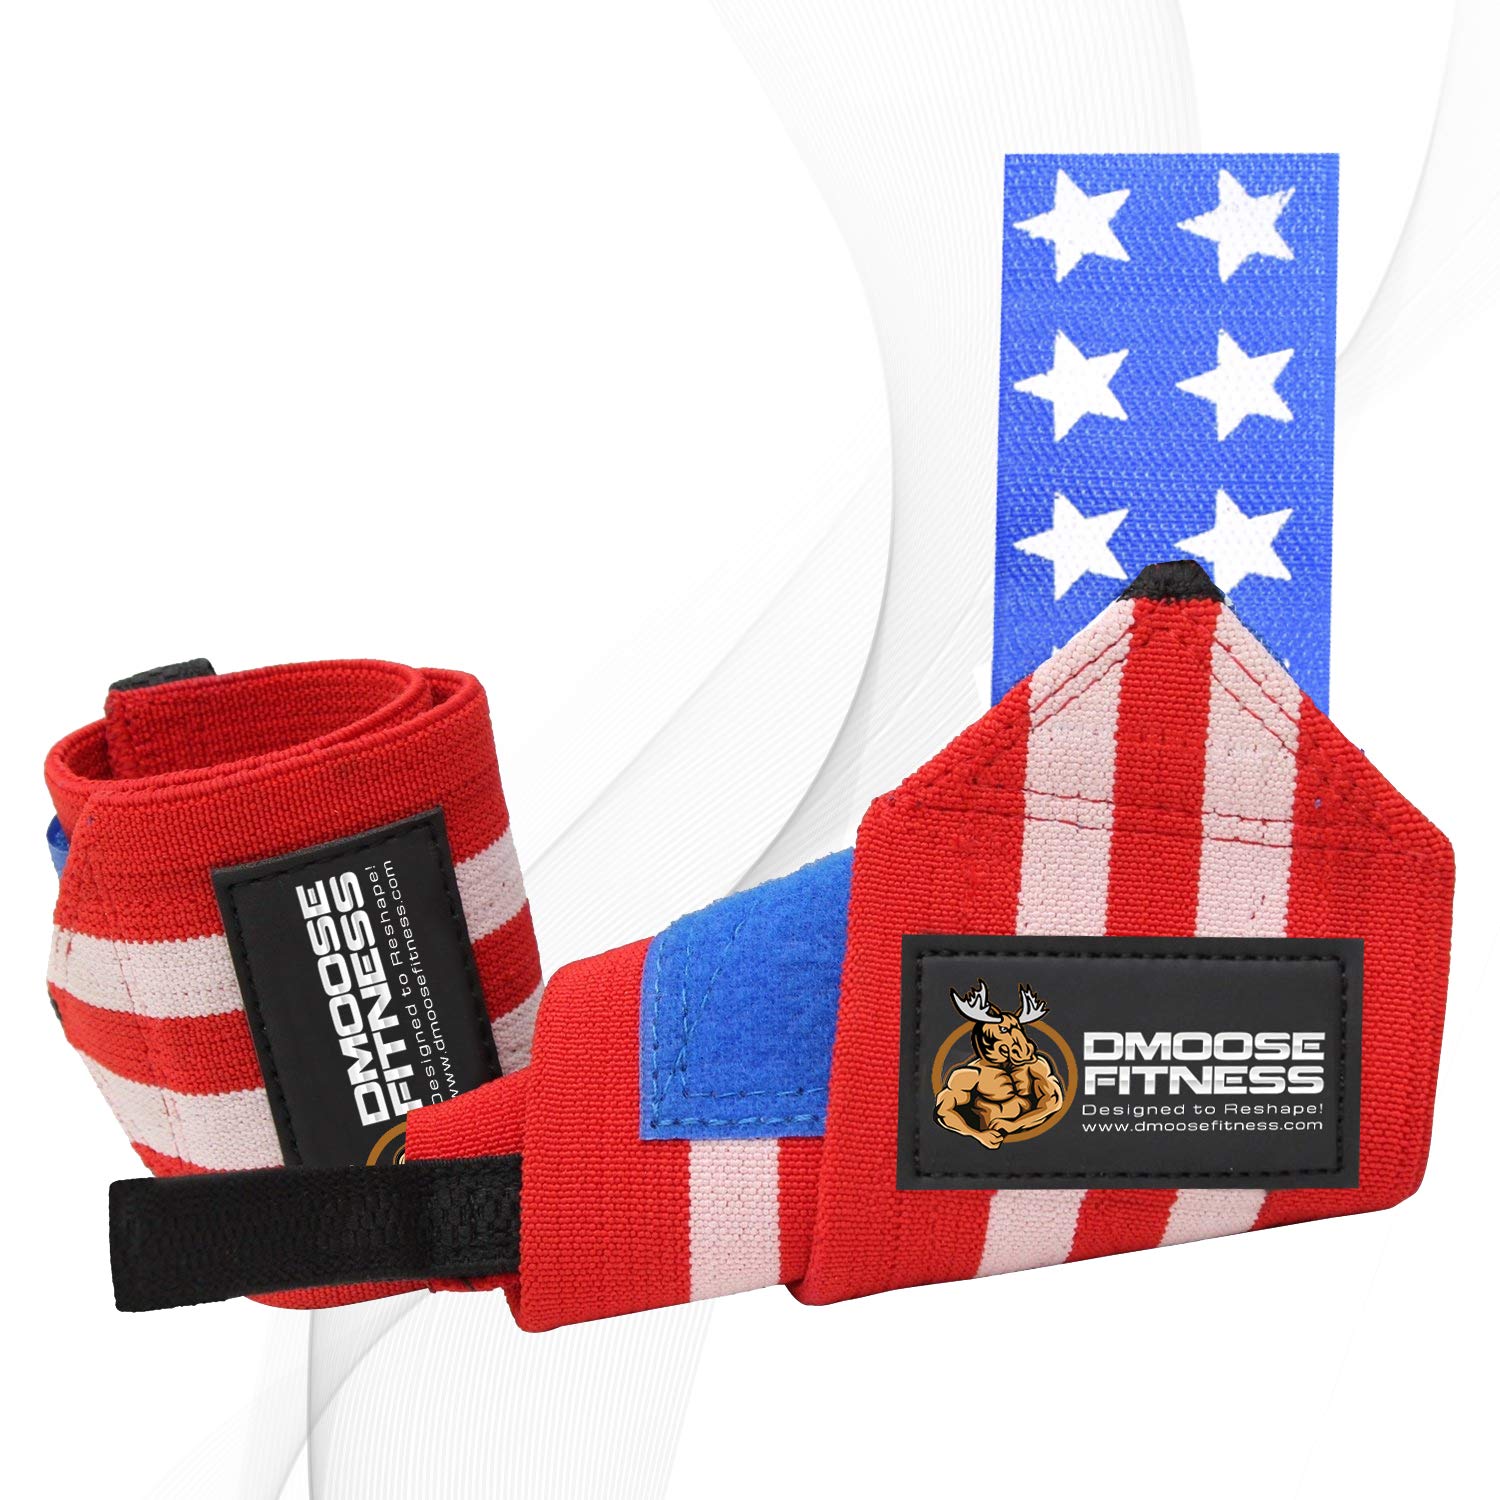 DMoose Fitness Wrist Wraps - Premium Quality, Strong Fastening Straps, Thumb Loops - Maximize Your Weightlifting, Powerlifting, Bodybuilding, Strength Training & Crossfit ...